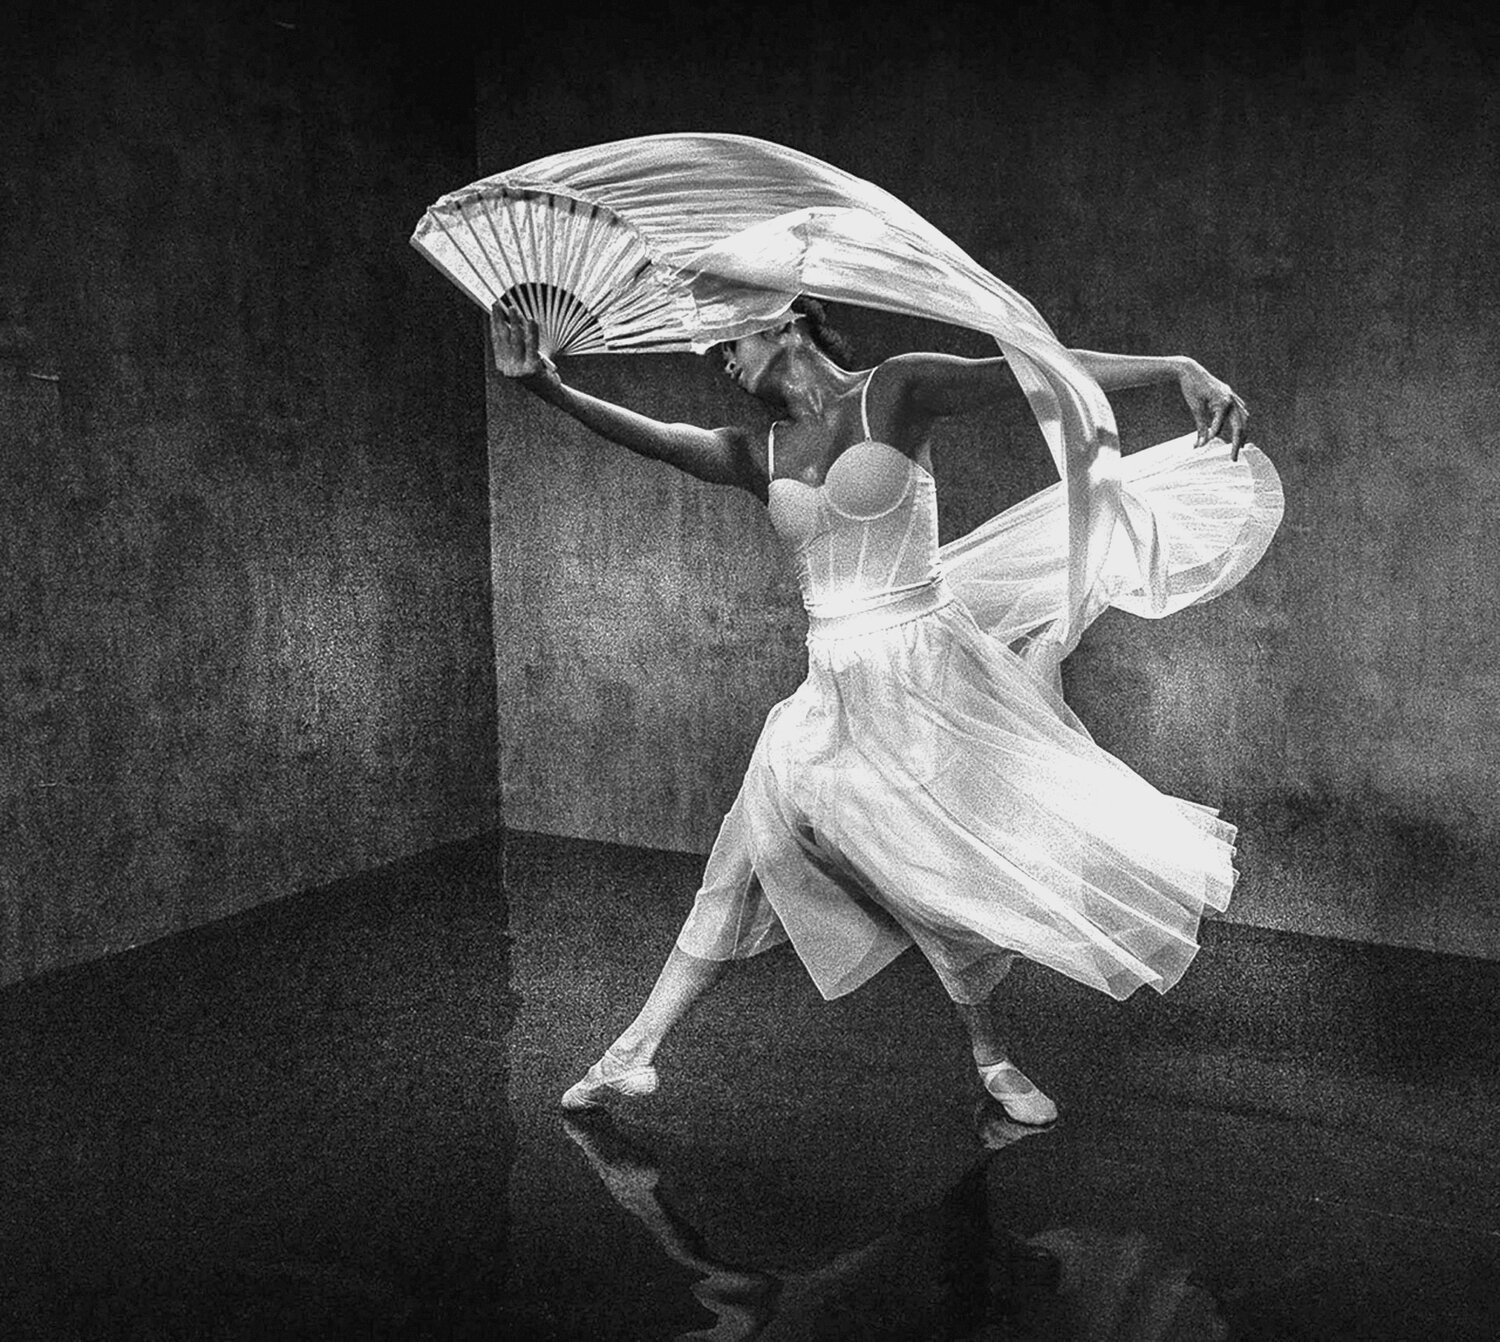 “Dancer” by Daniel Sierchio, a member of the Mill Photo Committee, has been accepted into this year’s juried Phillips’ Mill Photographic Exhibition.